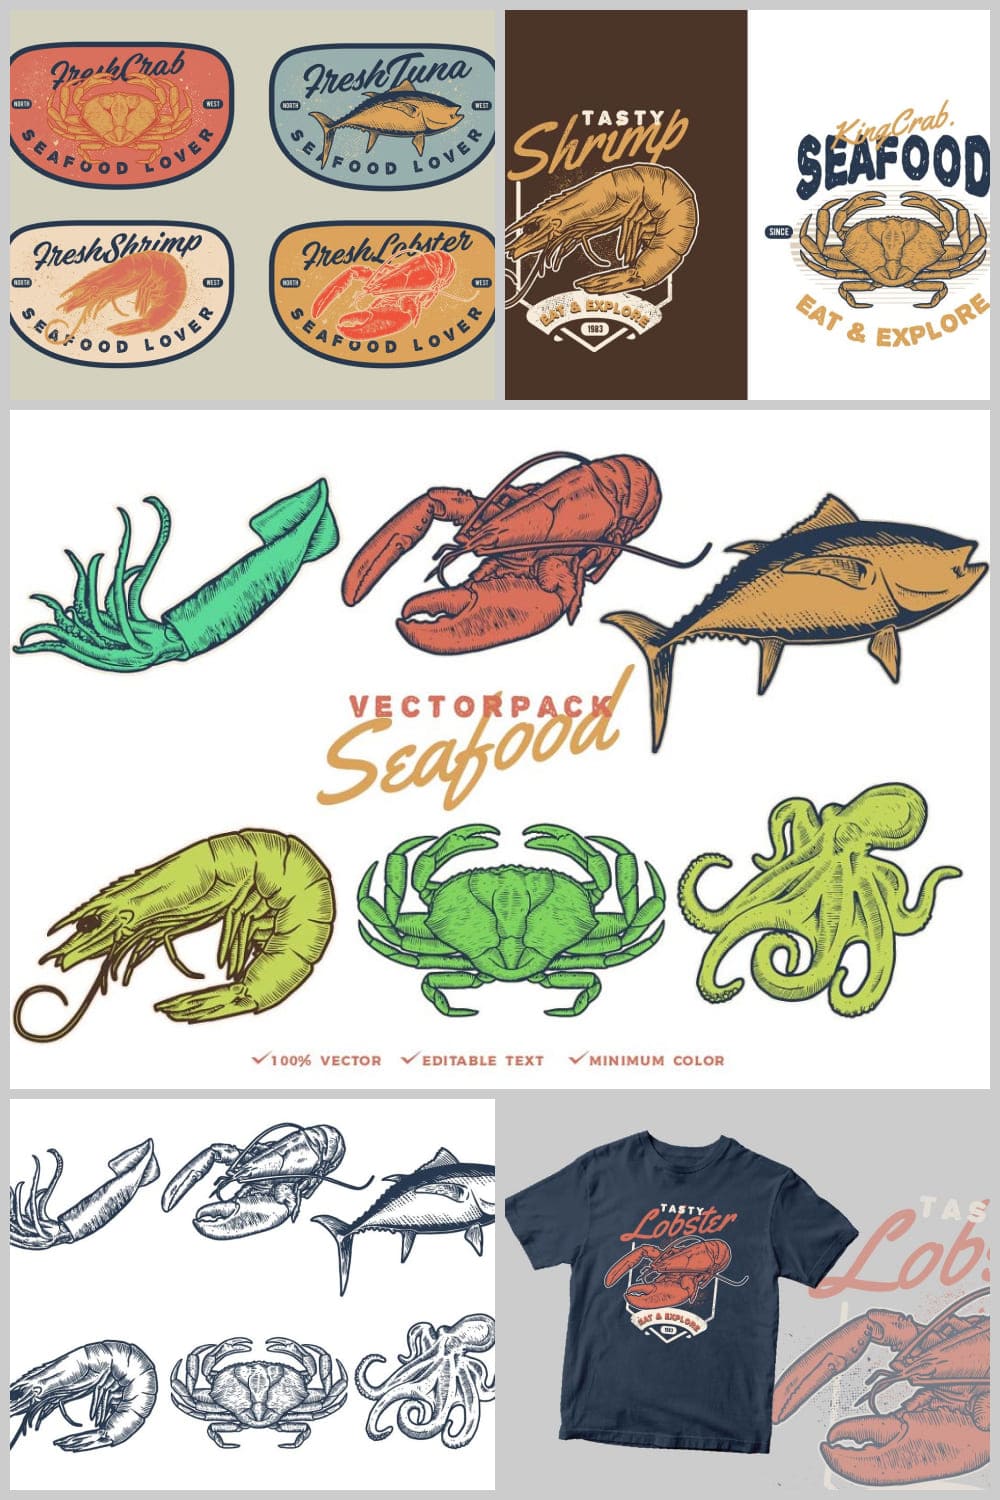 Seafood Vectorpack pinterest image.